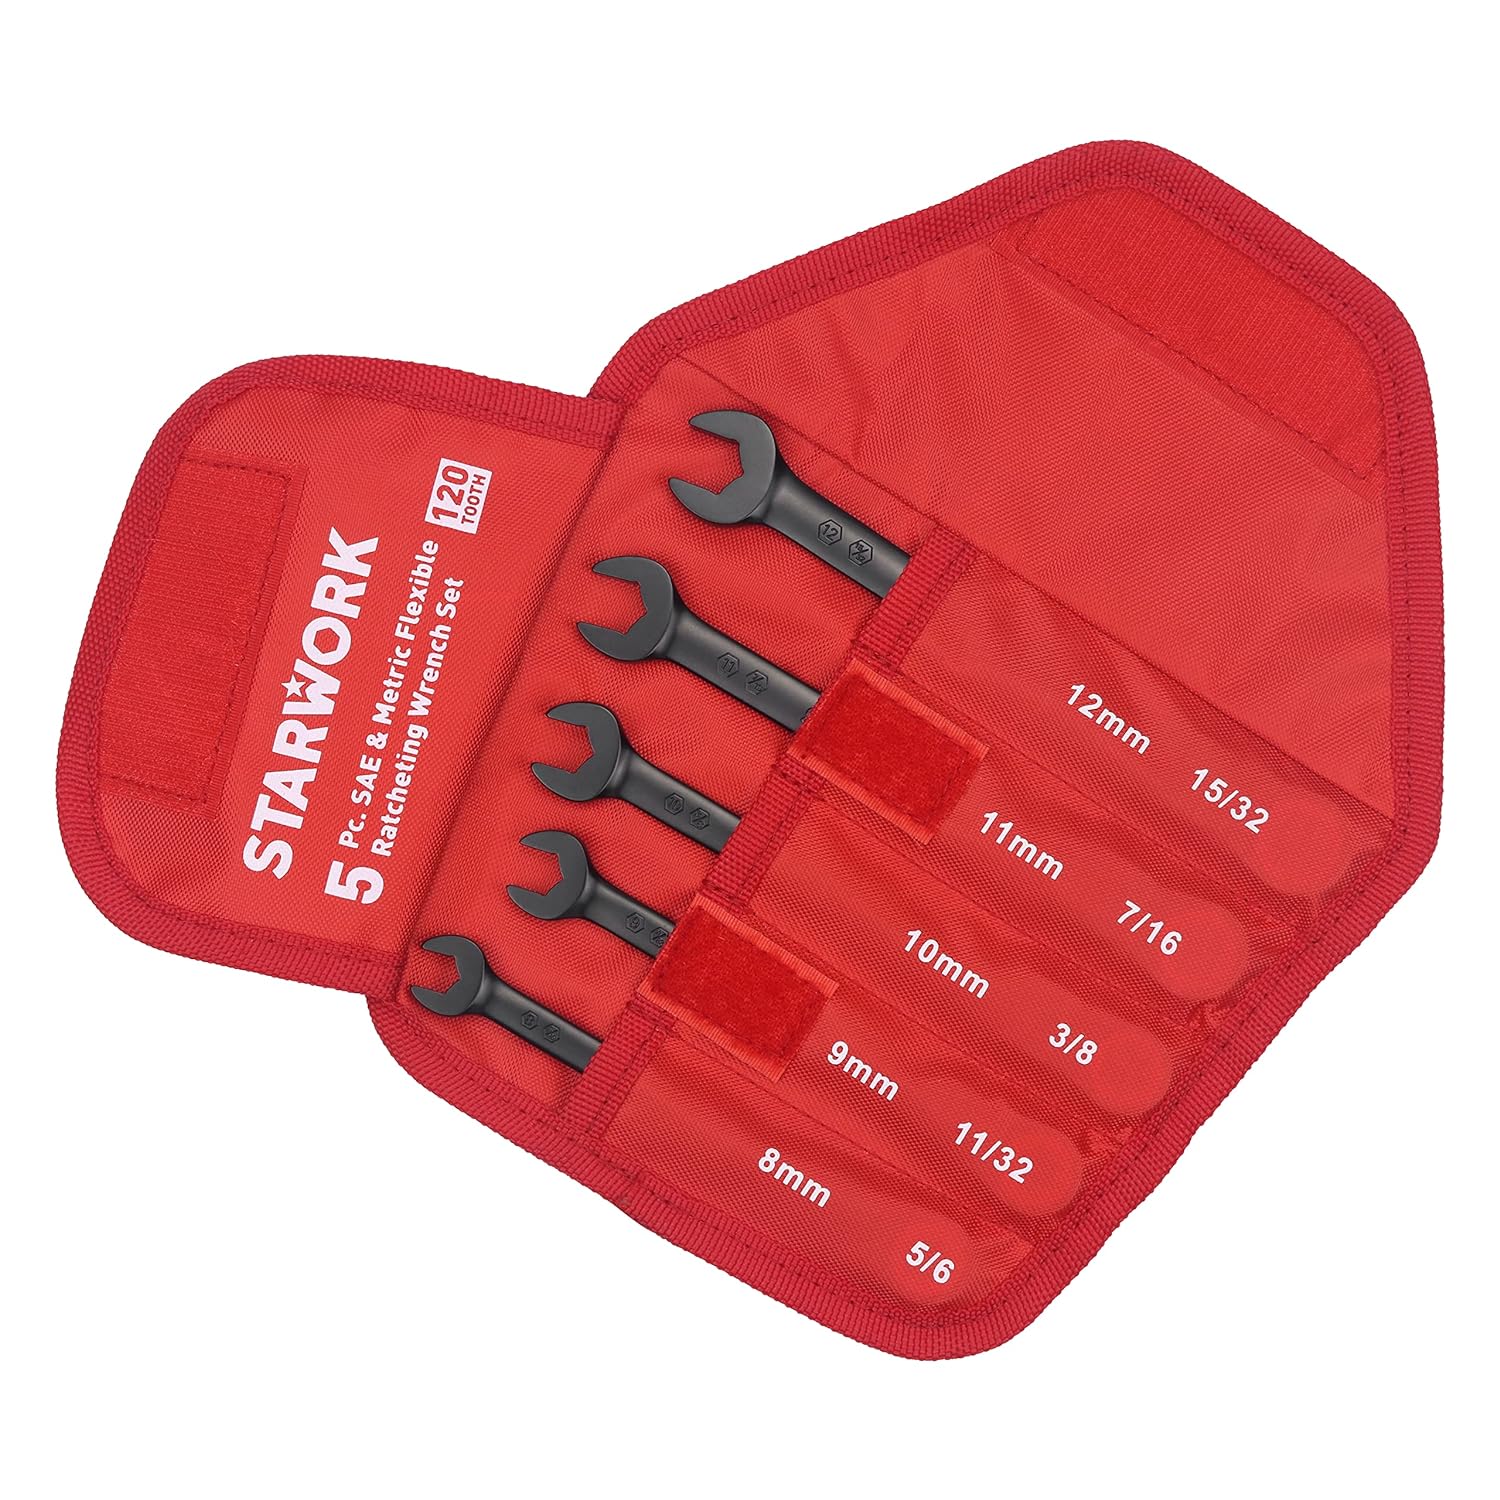 STARWORK TRUE MECHANIC™ 5Pc. 120T SAE&Metric Flexible Ratcheting Wrench Set, Professional, With Roll-Up Pouch Bag